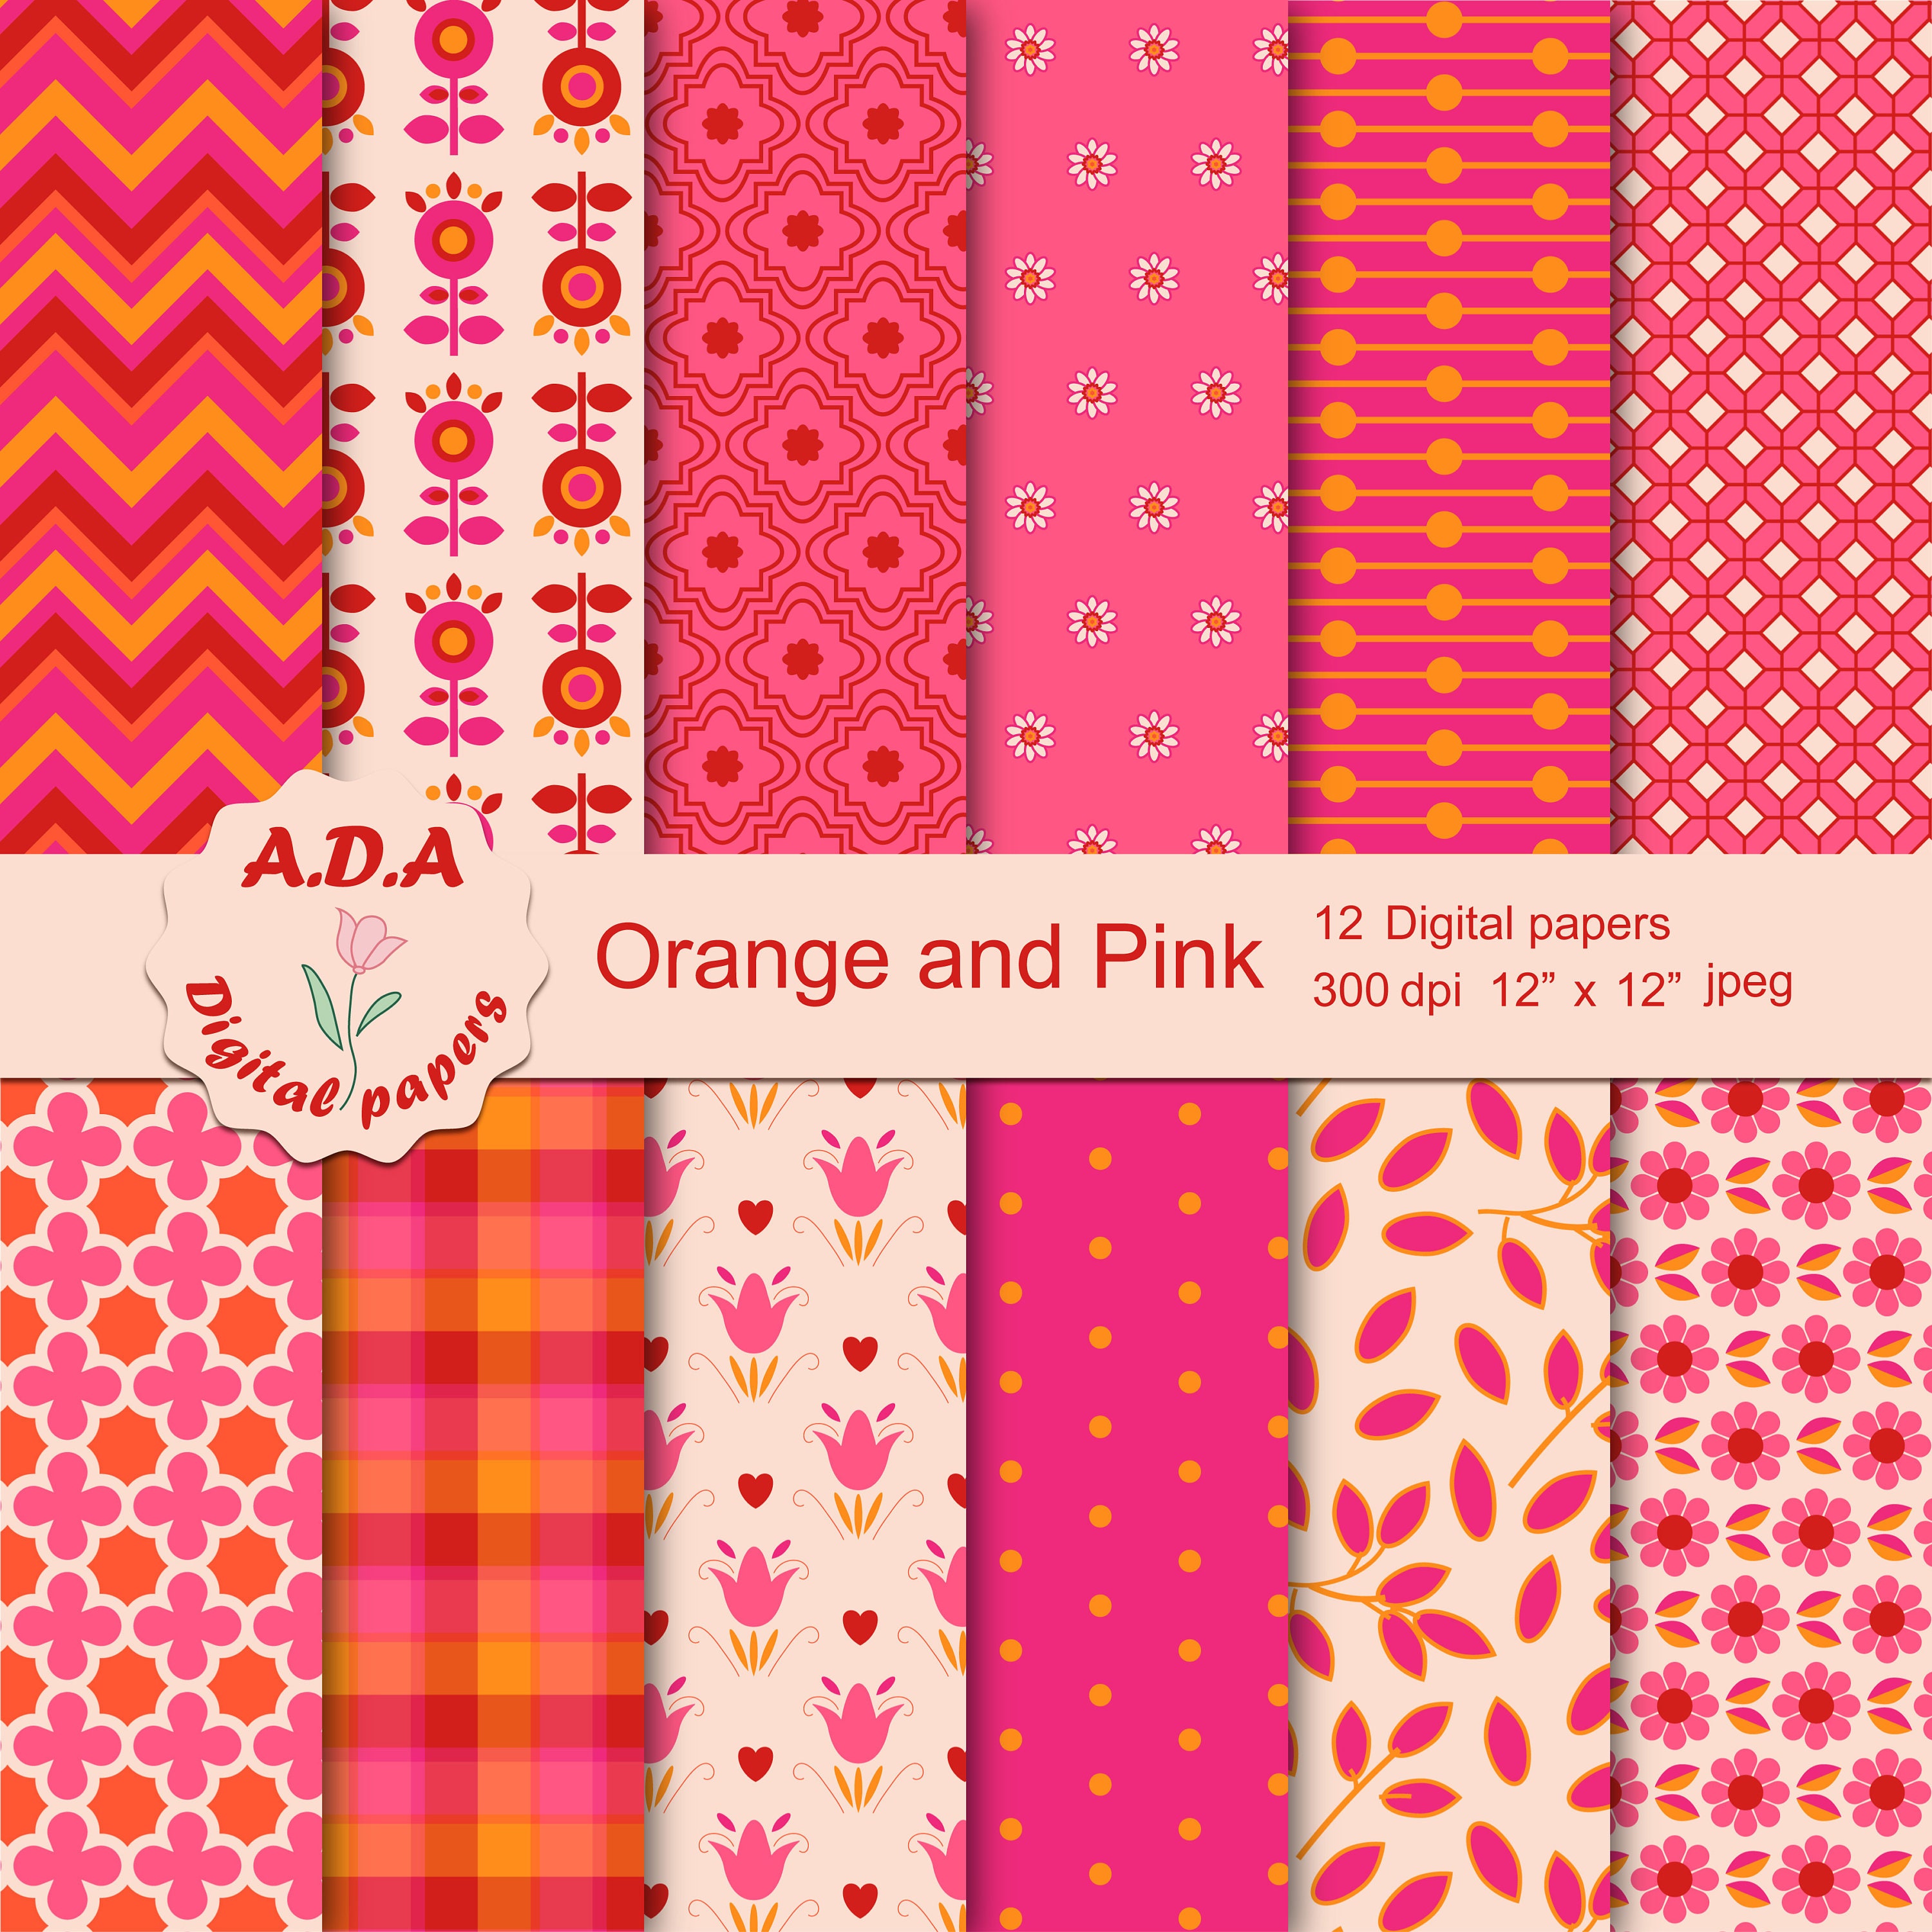 Hot Pink Digital Paper Pack Hot Pink Scrapbook Paper Commercial Use  Backgrounds: Hot Pink Chevron, Polkadots, Stripes, Stars, Gingham 